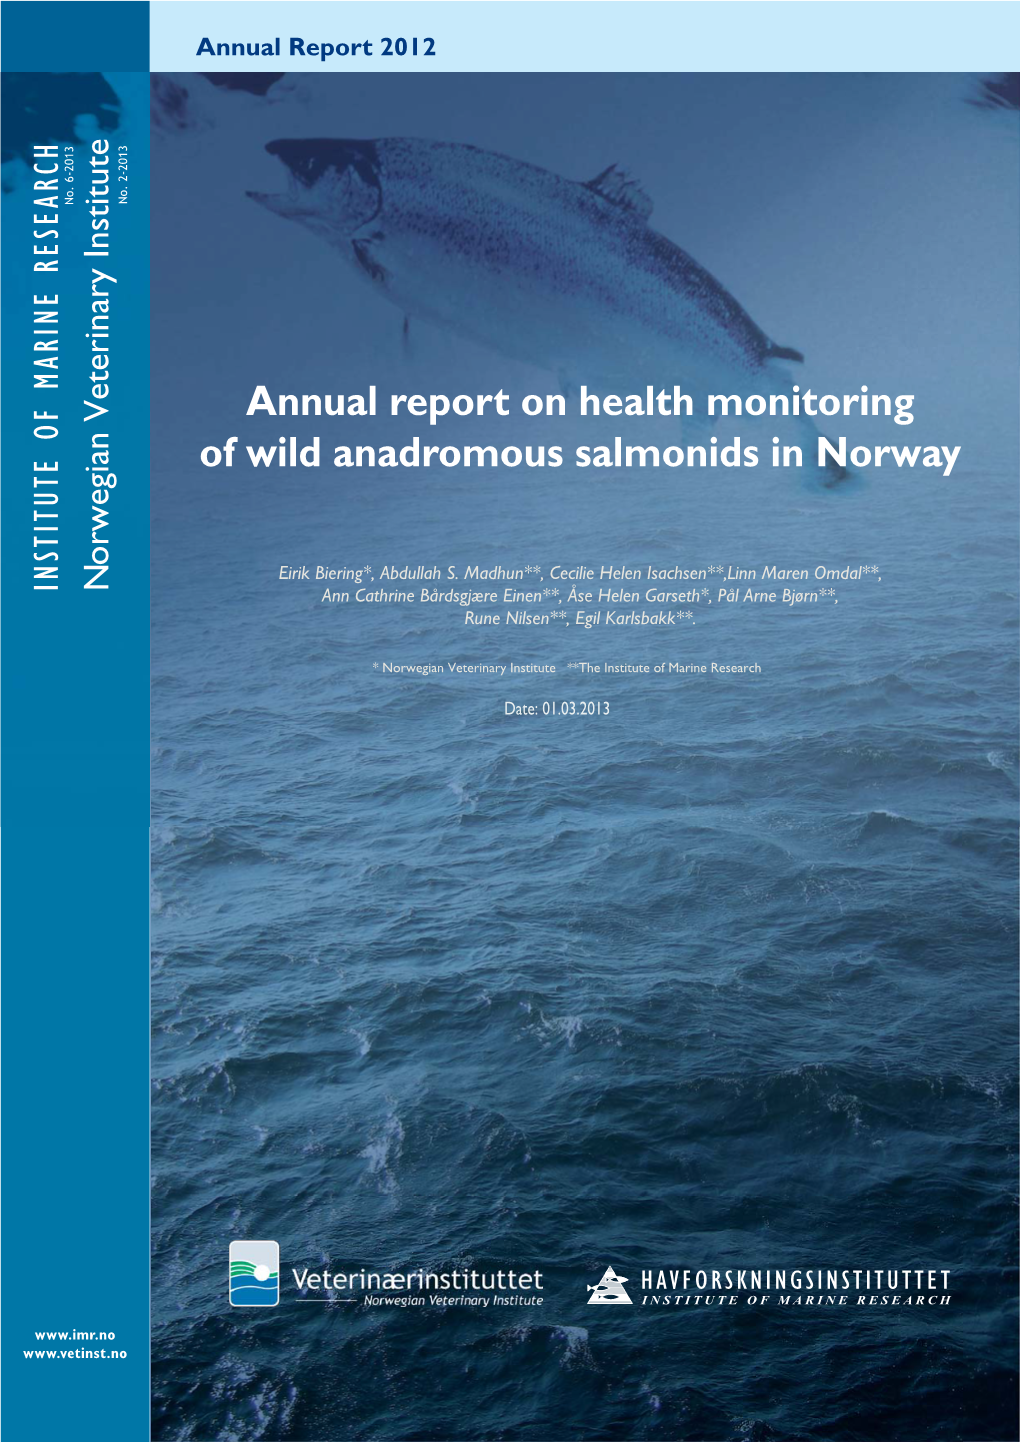 Annual Report on Health Monitoring of Wild Anadromous Salmonids in Norway